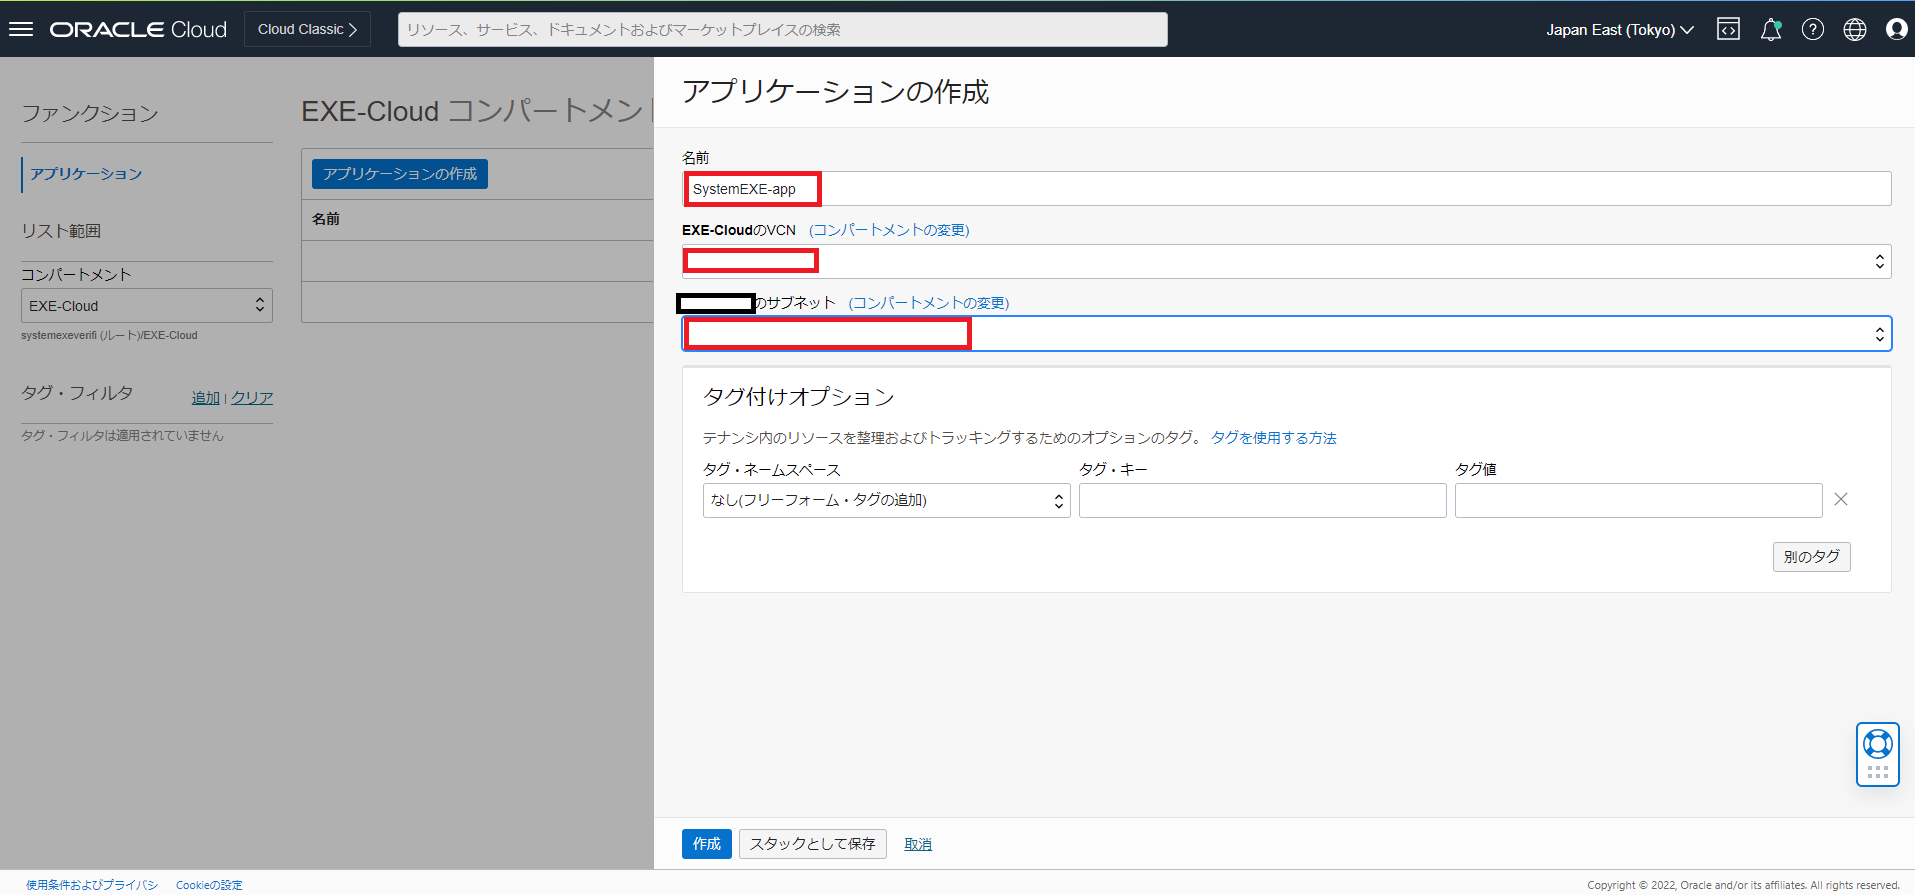 Oracle Cloud Infrastructure Functionsではじめるサーバレス入門 12